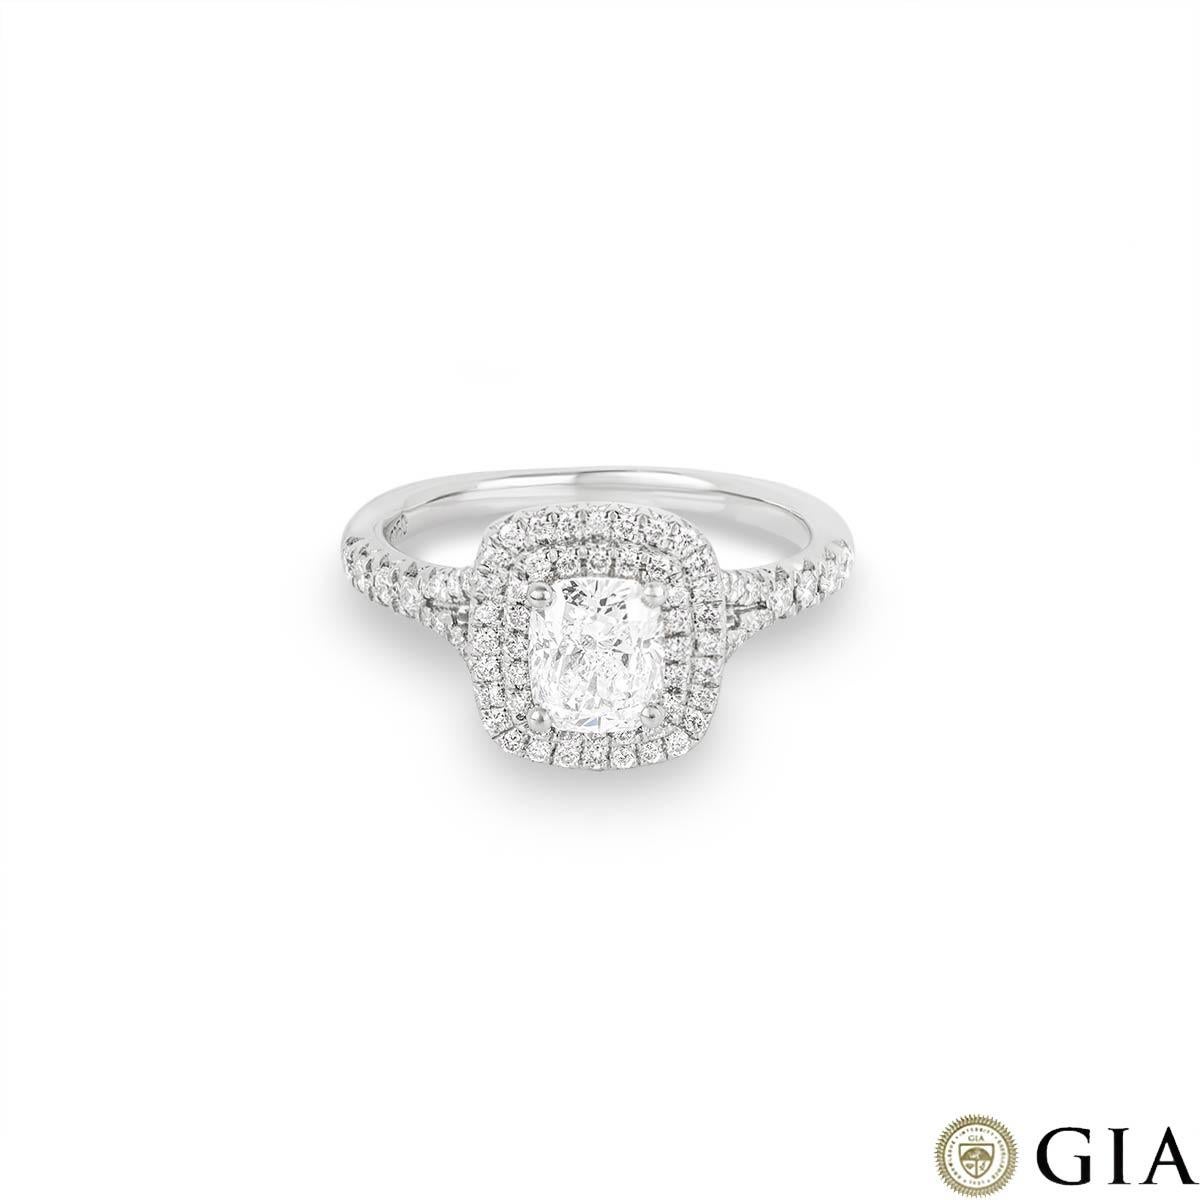 An stunning platinum diamond engagement ring. The ring features a cushion cut diamond set to the centre of a double halo mount weighing 1.01ct, D colour and SI2 clarity. Further complementing the central diamond are 72 round brilliant cut diamonds